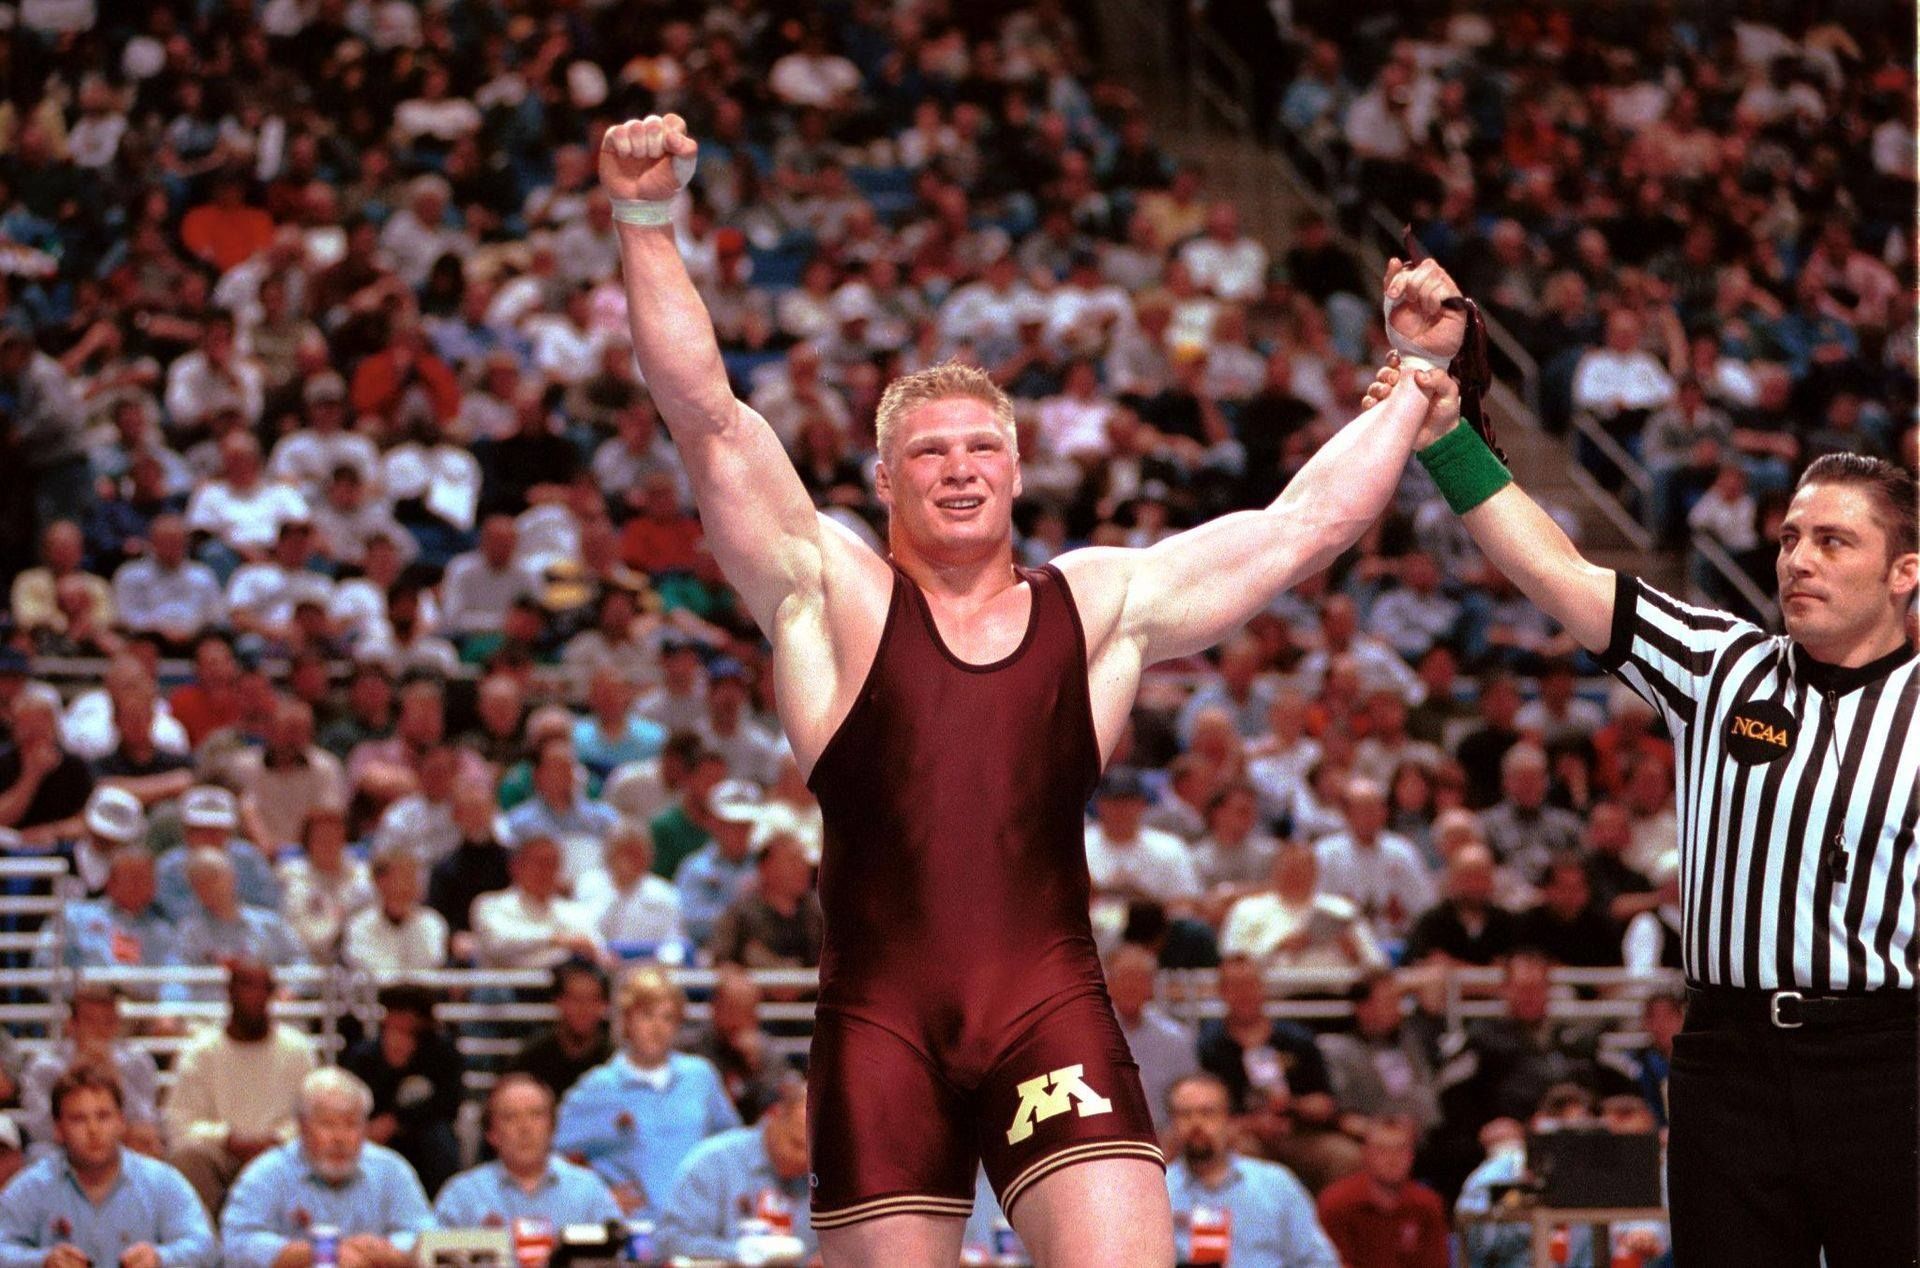 Brock Lesnar lost the 1999 NCAA Division I Heavyweight Championship